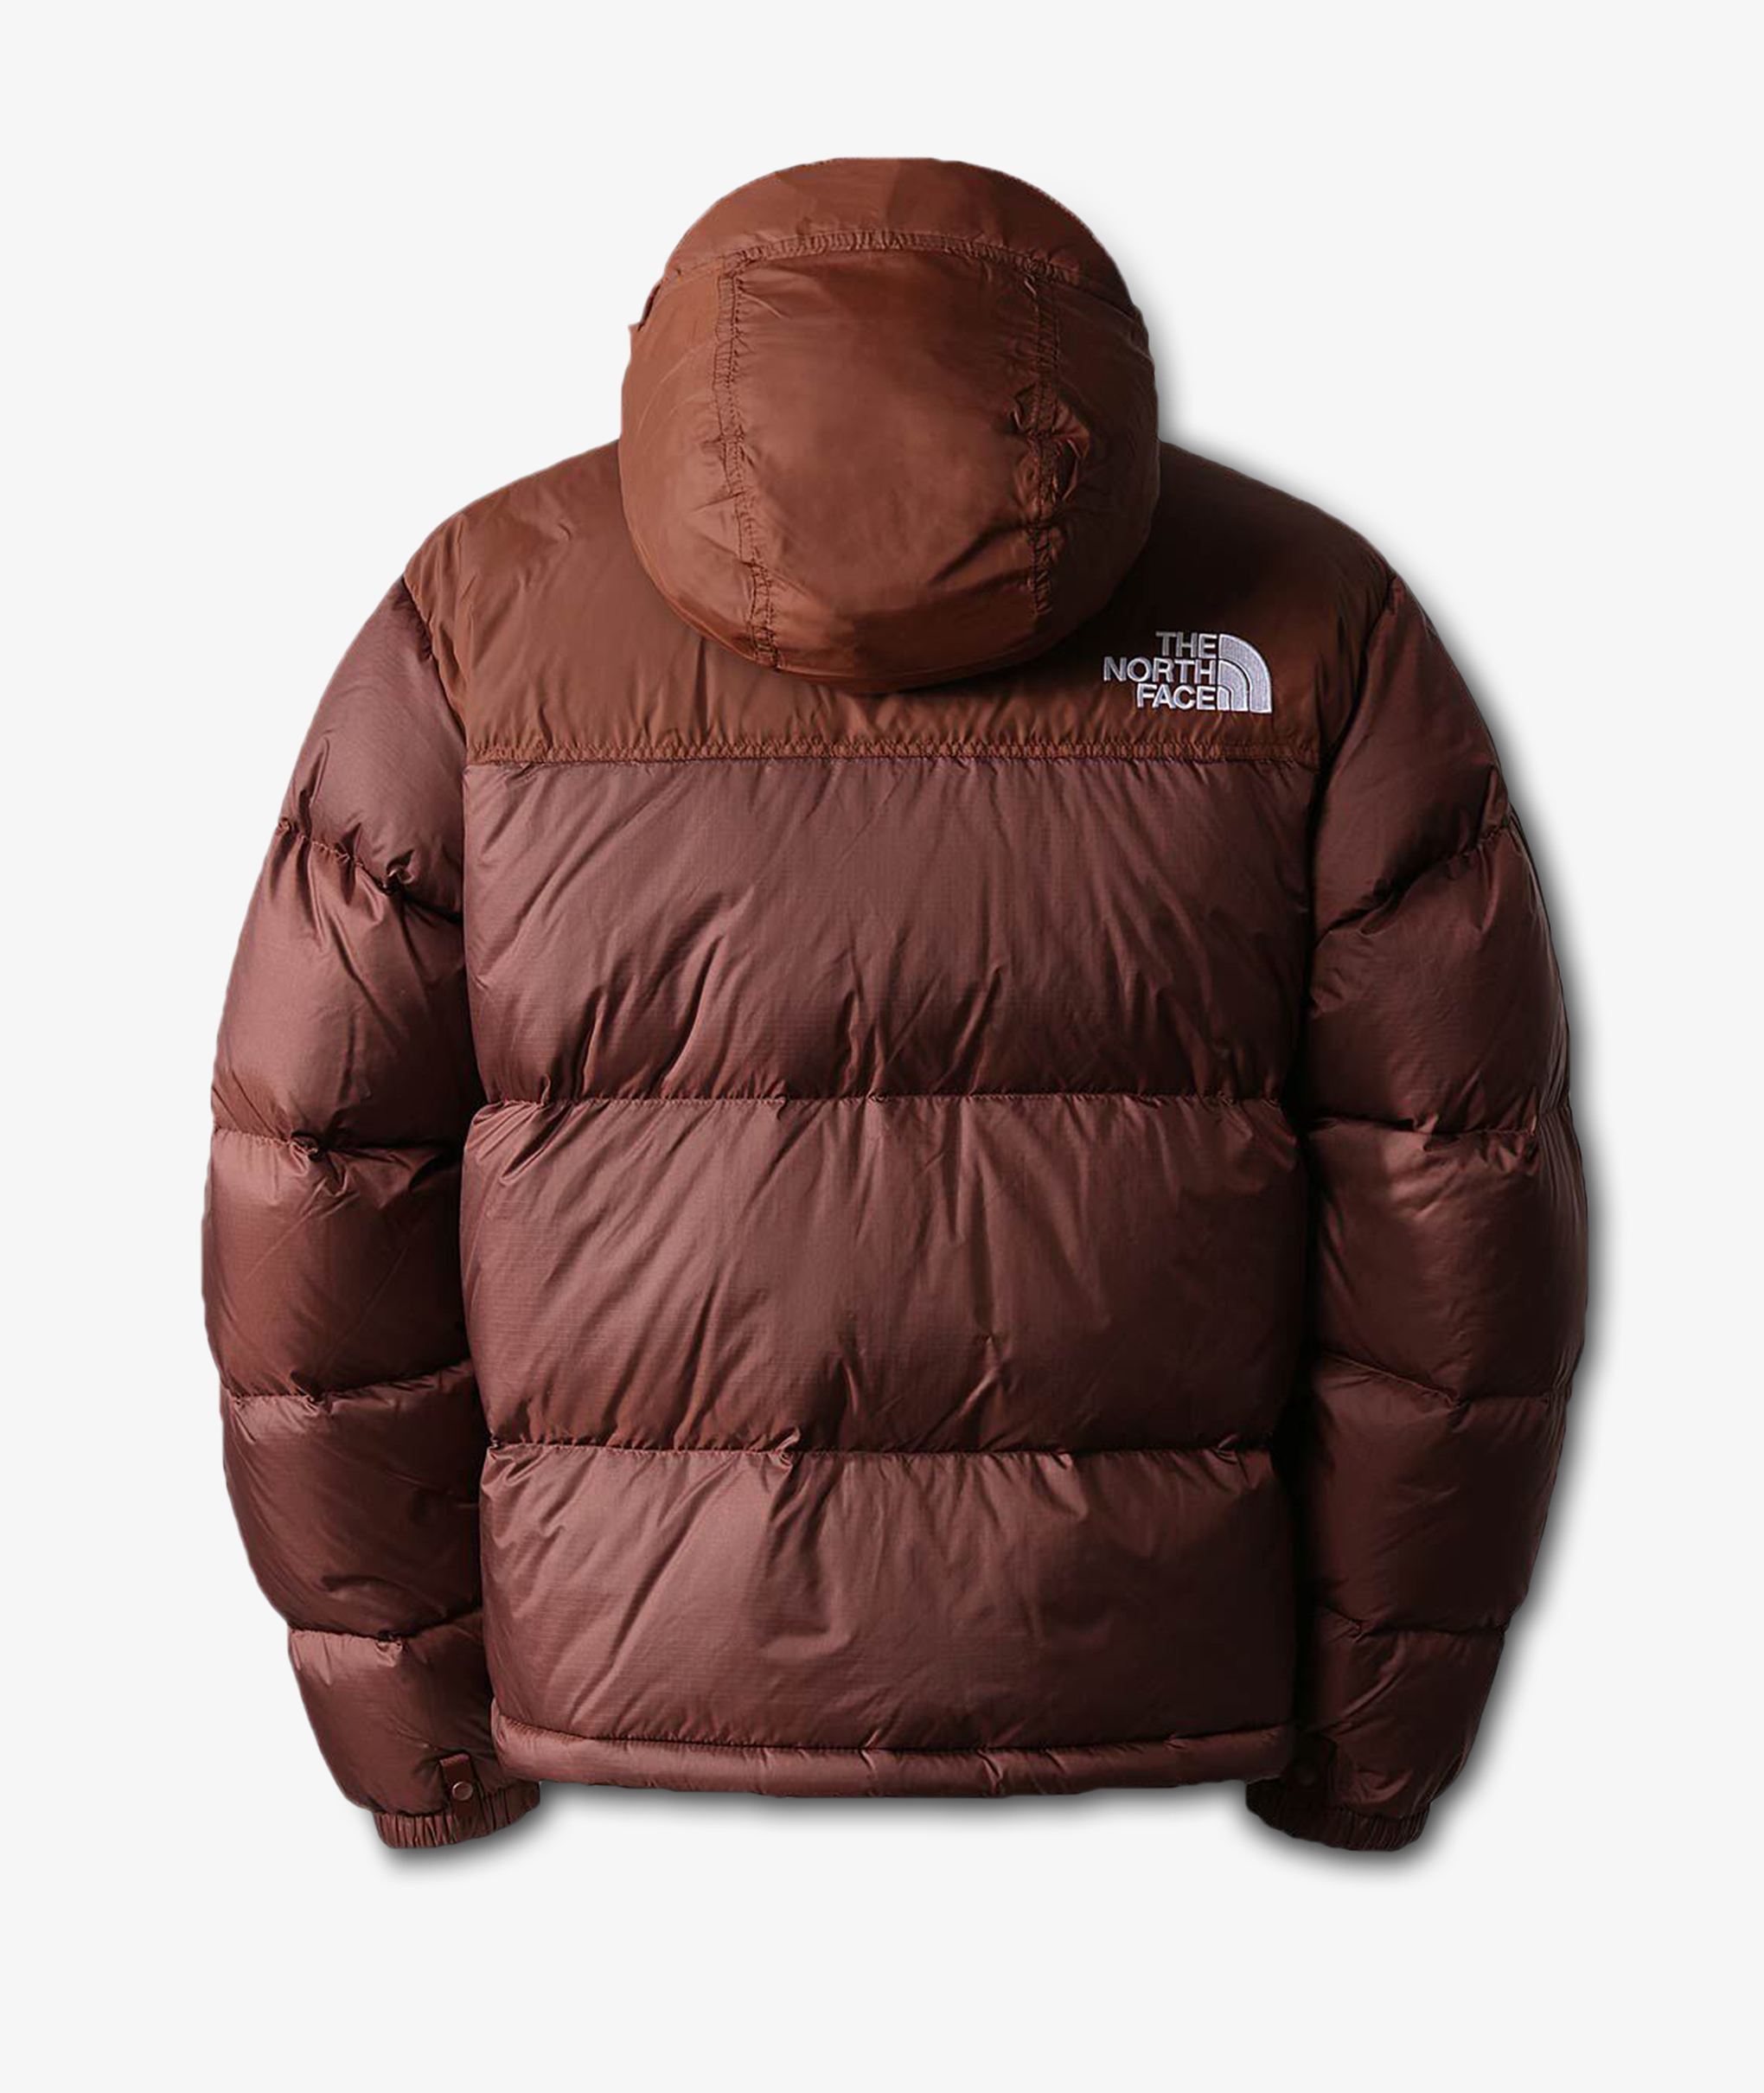 Gedetailleerd Controversieel Monument Norse Store | Shipping Worldwide - The North Face 1996 Retro Nuptse Jacket  - Dark Oak